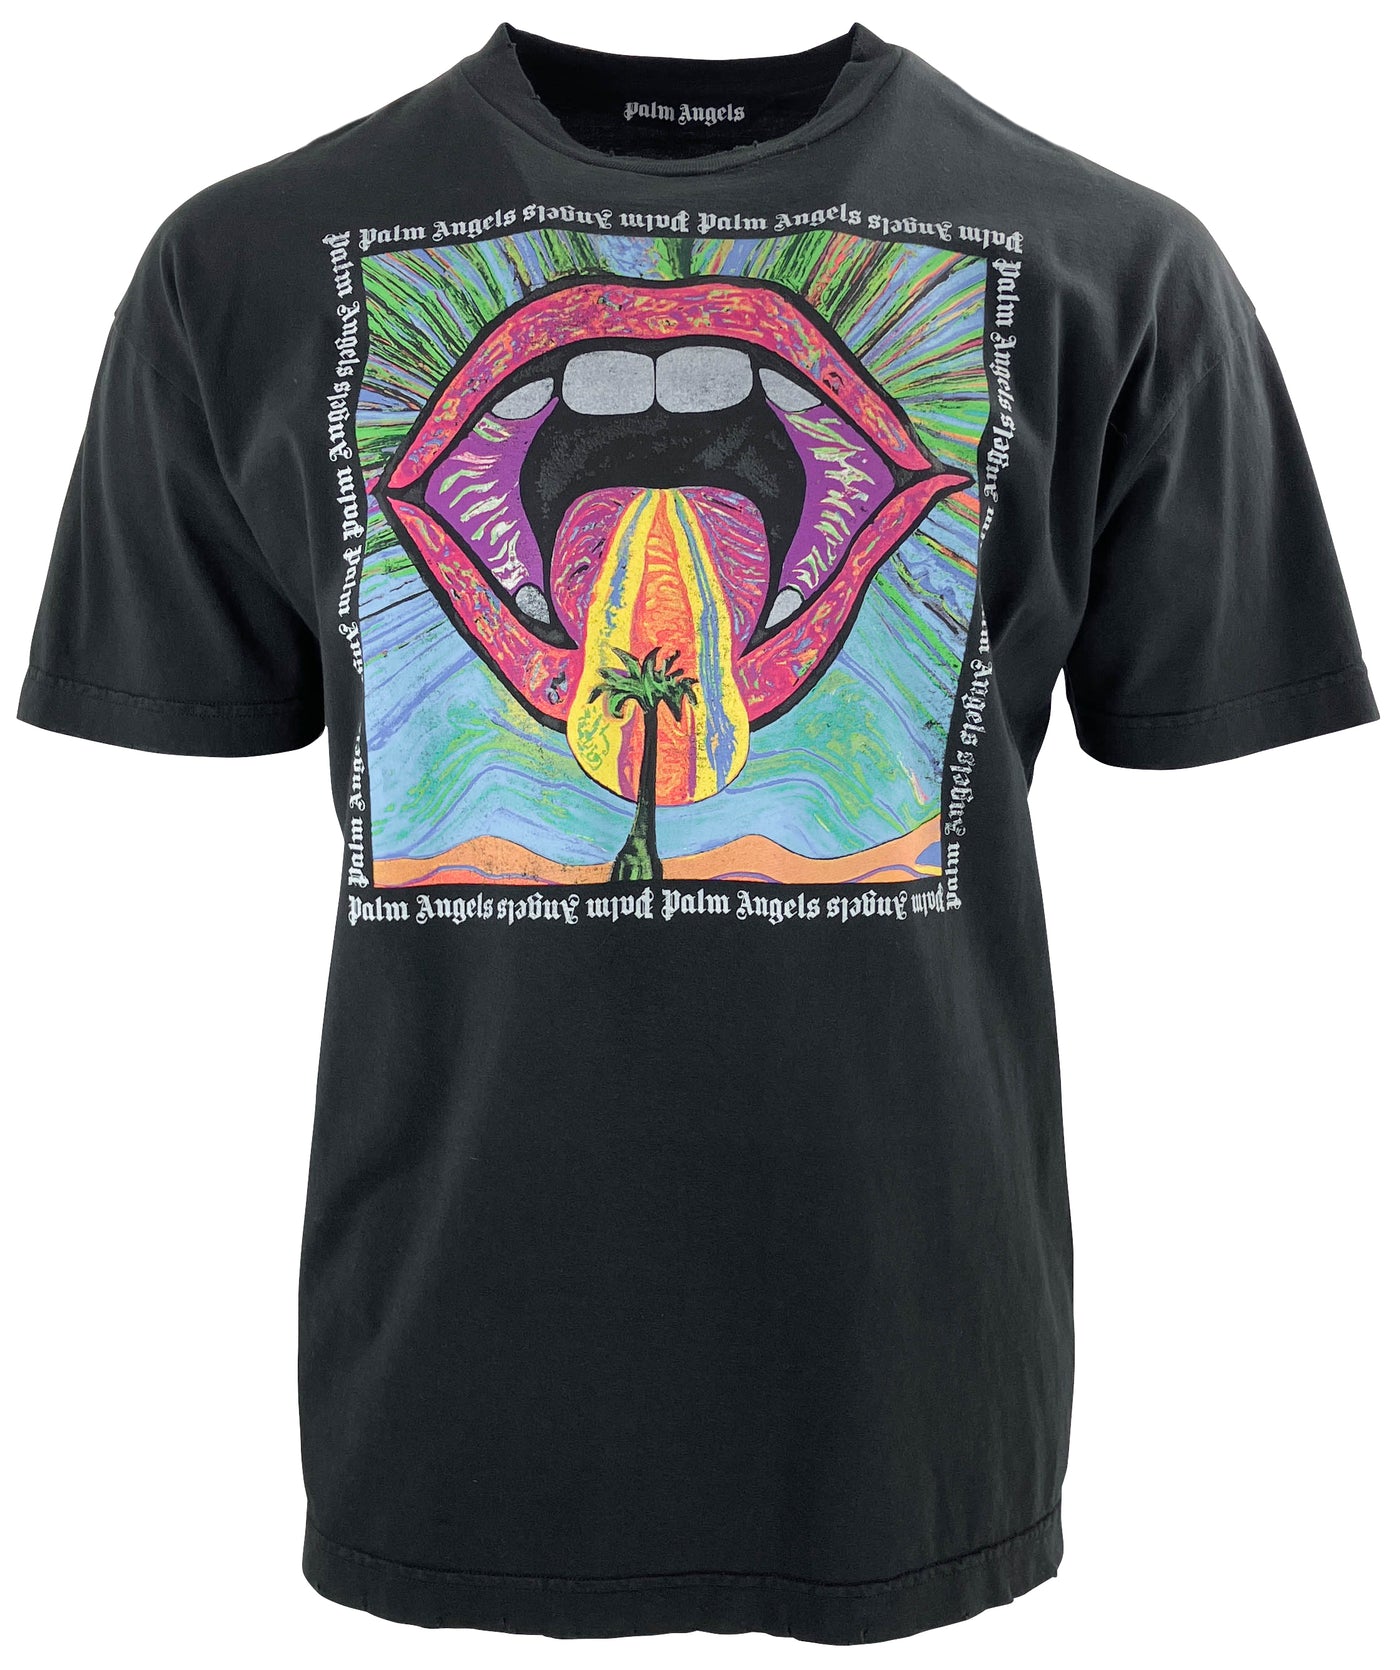 Palm Angels Crazy Mouth T-Shirt in Black - Discounts on Palm Angels at UAL